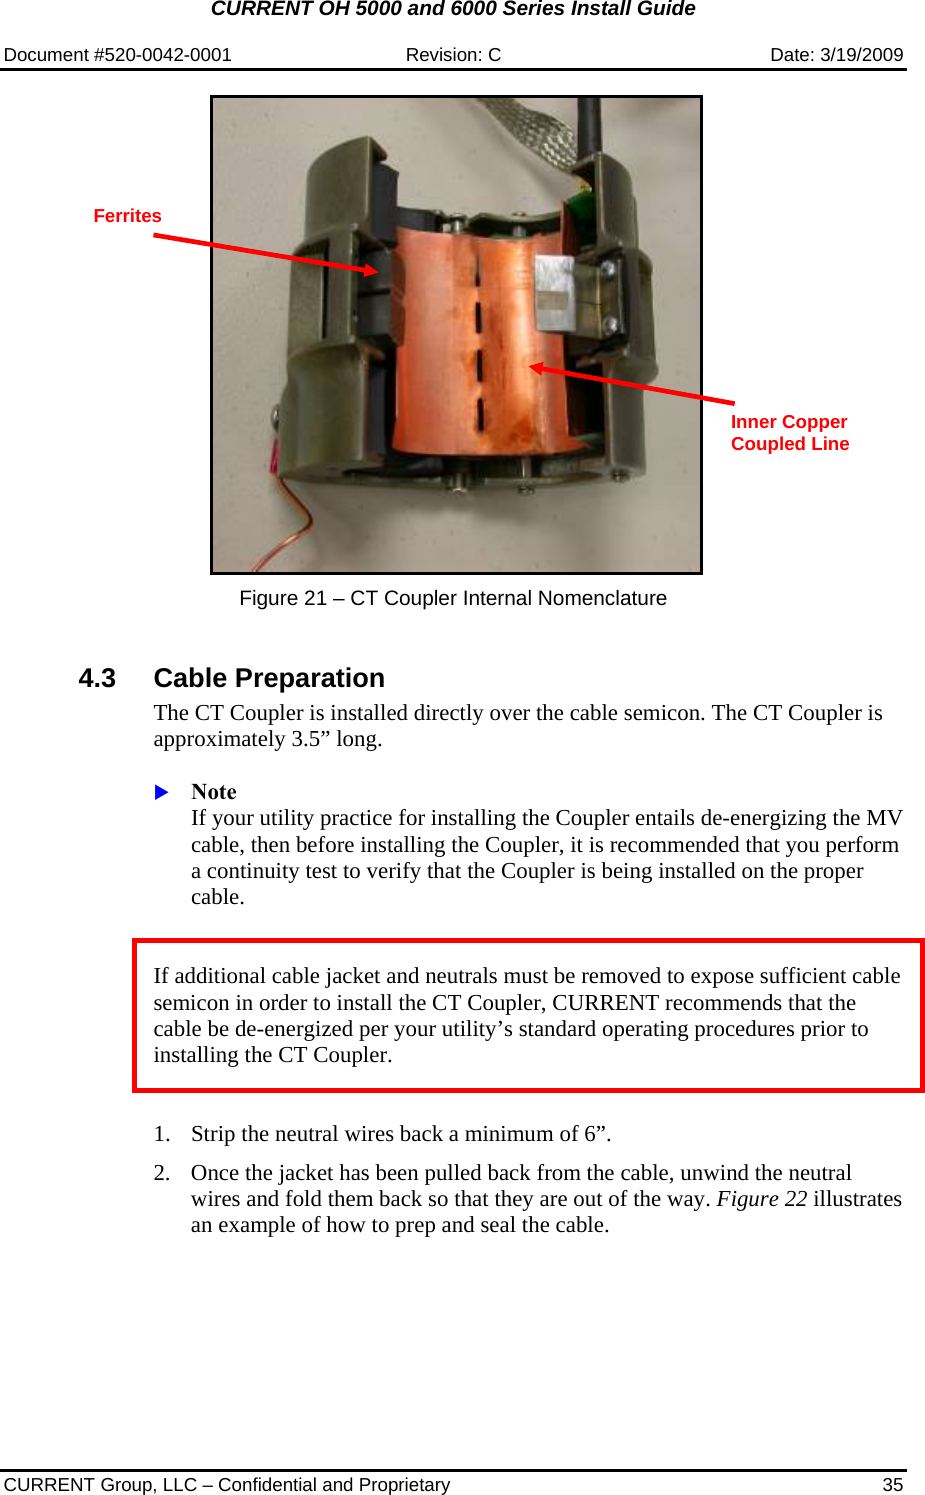 CURRENT OH 5000 and 6000 Series Install Guide  Document #520-0042-0001  Revision: C  Date: 3/19/2009  CURRENT Group, LLC – Confidential and Proprietary  35      Figure 21 – CT Coupler Internal Nomenclature    4.3 Cable Preparation The CT Coupler is installed directly over the cable semicon. The CT Coupler is approximately 3.5” long.   X Note  If your utility practice for installing the Coupler entails de-energizing the MV cable, then before installing the Coupler, it is recommended that you perform a continuity test to verify that the Coupler is being installed on the proper cable.   If additional cable jacket and neutrals must be removed to expose sufficient cable semicon in order to install the CT Coupler, CURRENT recommends that the cable be de-energized per your utility’s standard operating procedures prior to installing the CT Coupler.    1. Strip the neutral wires back a minimum of 6”.   2. Once the jacket has been pulled back from the cable, unwind the neutral wires and fold them back so that they are out of the way. Figure 22 illustrates an example of how to prep and seal the cable. Ferrites Inner Copper Coupled Line 